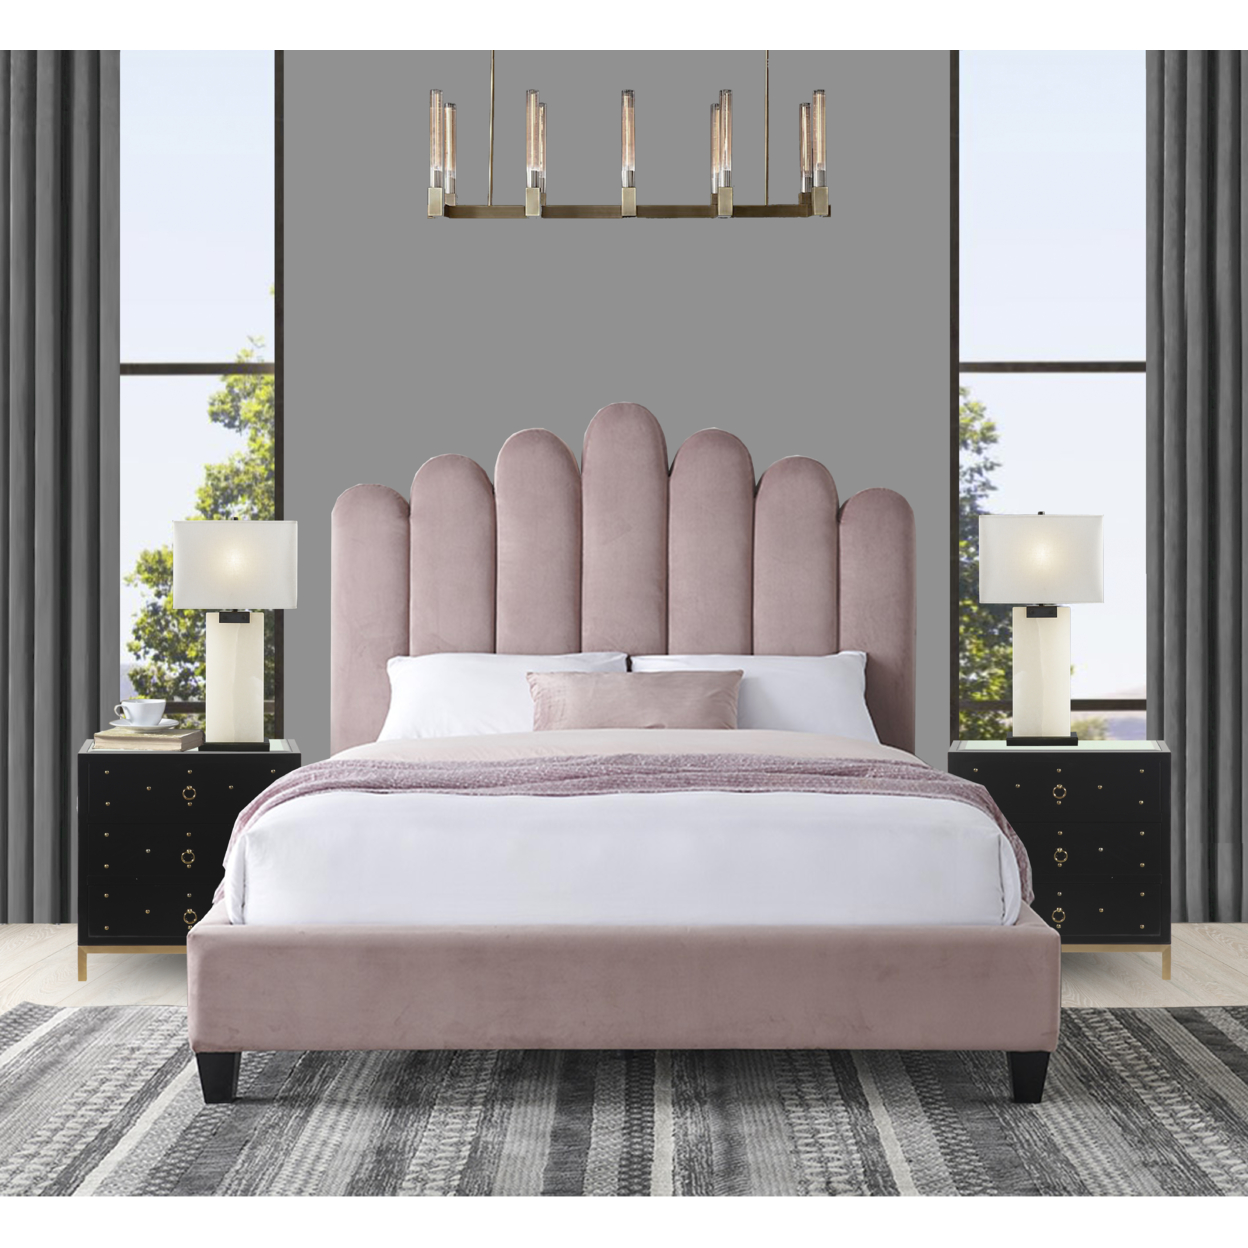 Iconic Home Brynn Platform Bed Frame With Headboard Velvet Upholstered Vertical Channel Quilted - Blush, King